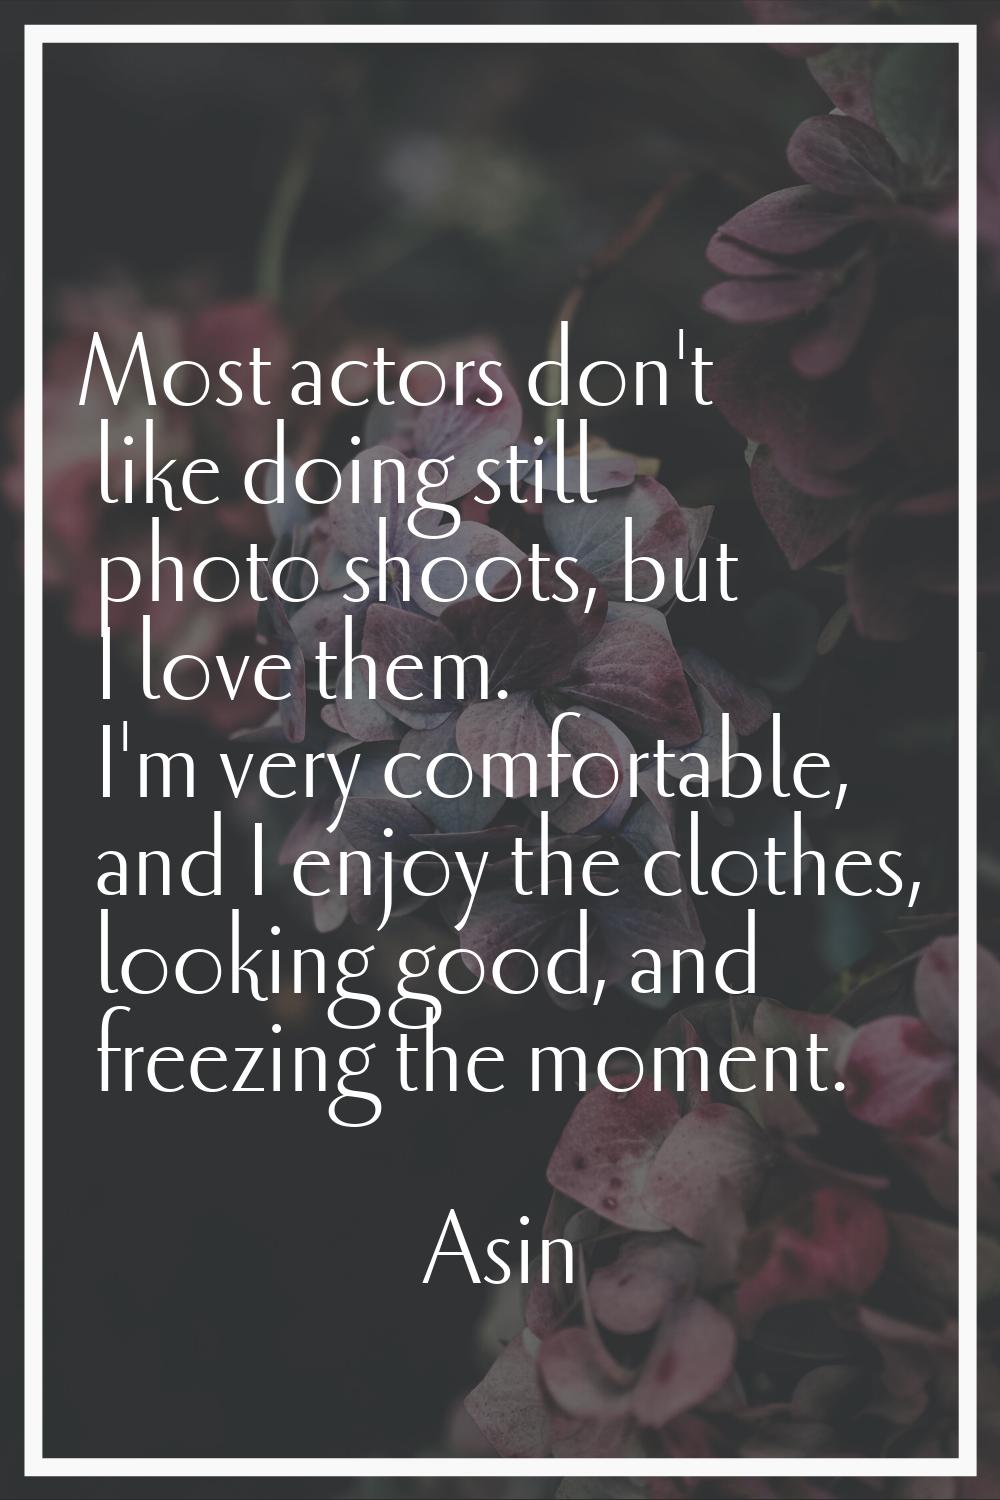 Most actors don't like doing still photo shoots, but I love them. I'm very comfortable, and I enjoy